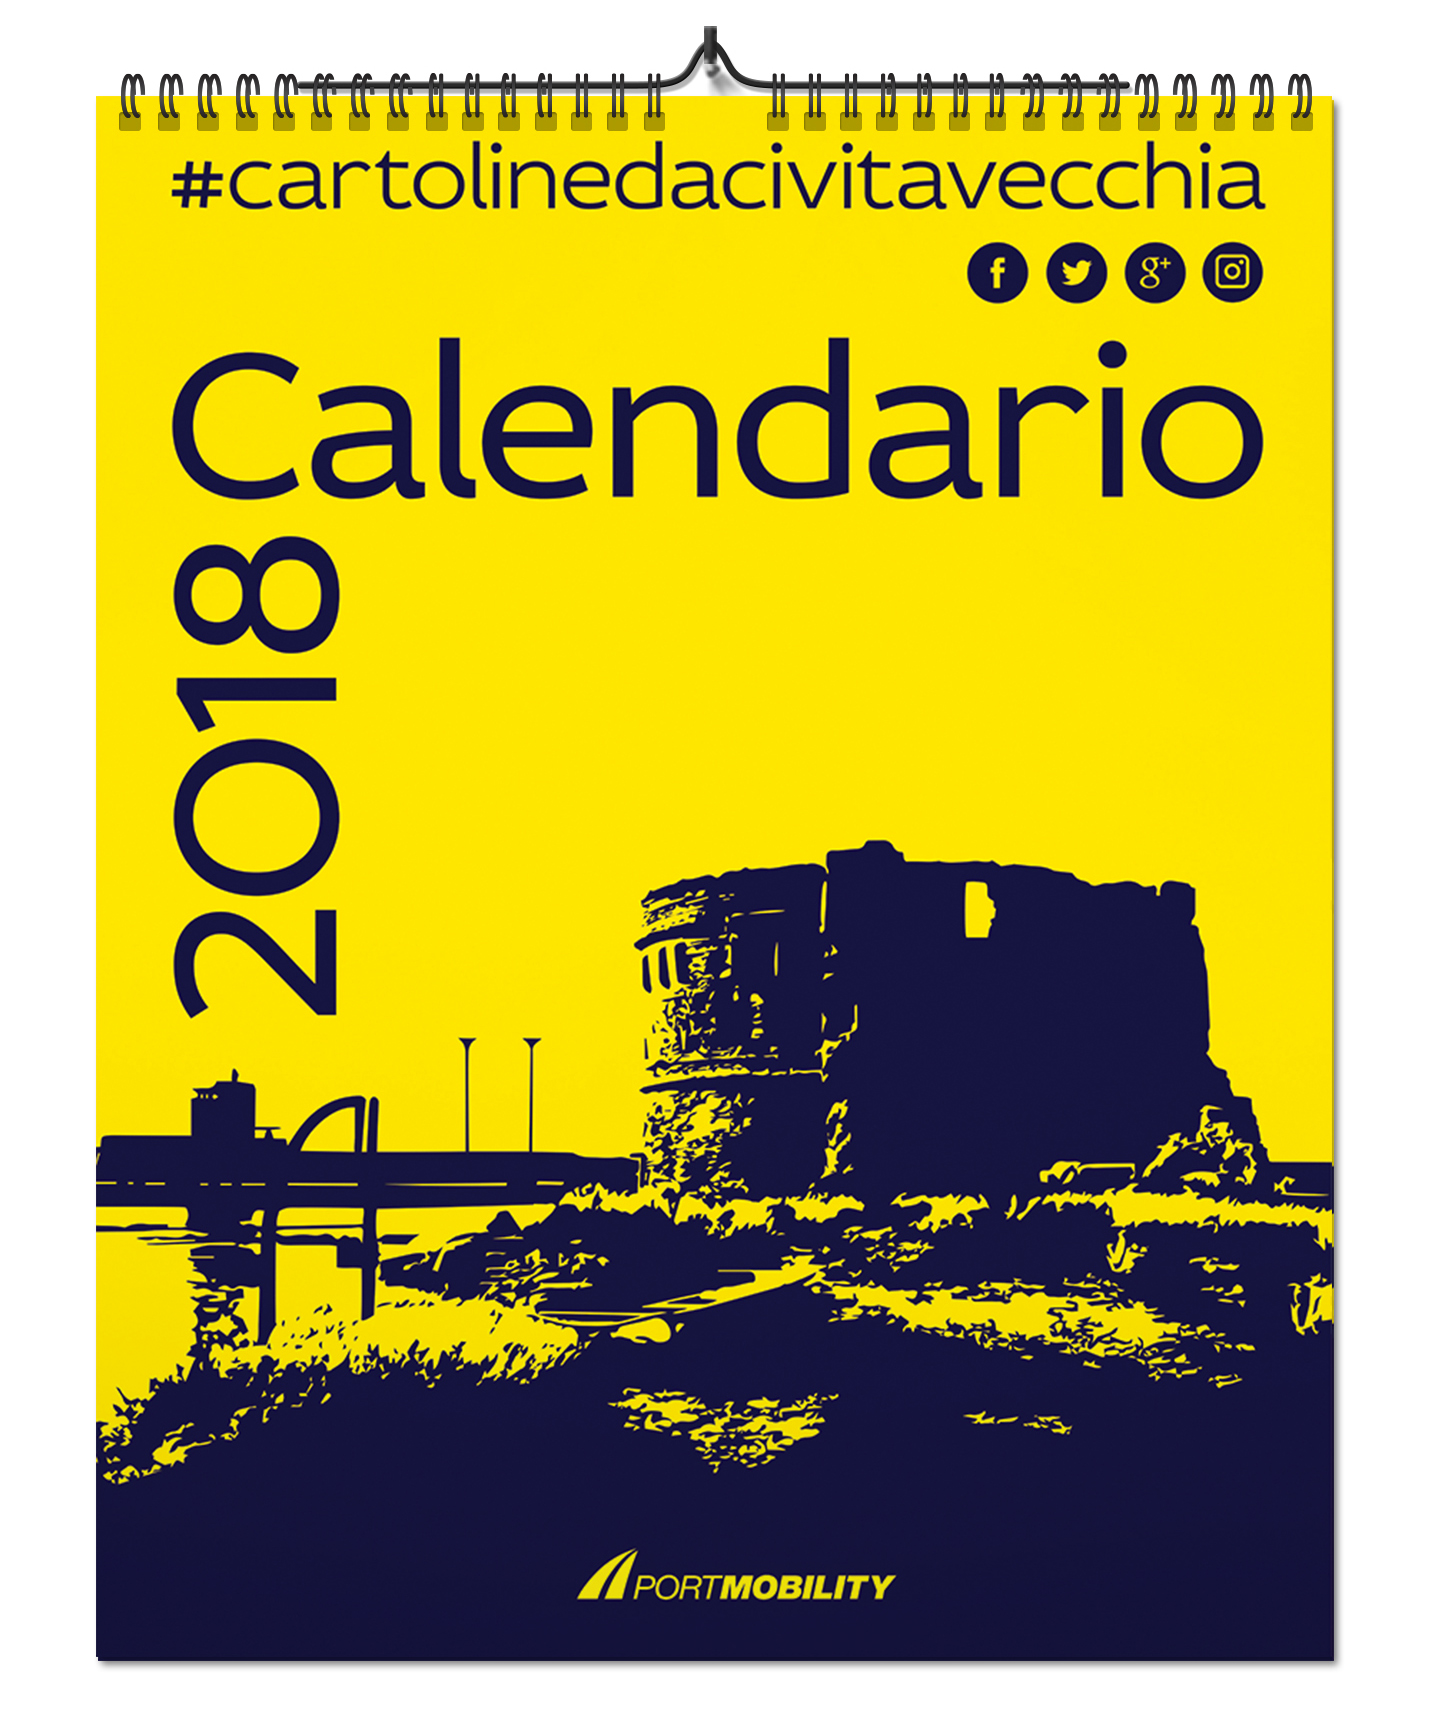 Cover of the Calendar 2018 of Postcards from Civitavecchia